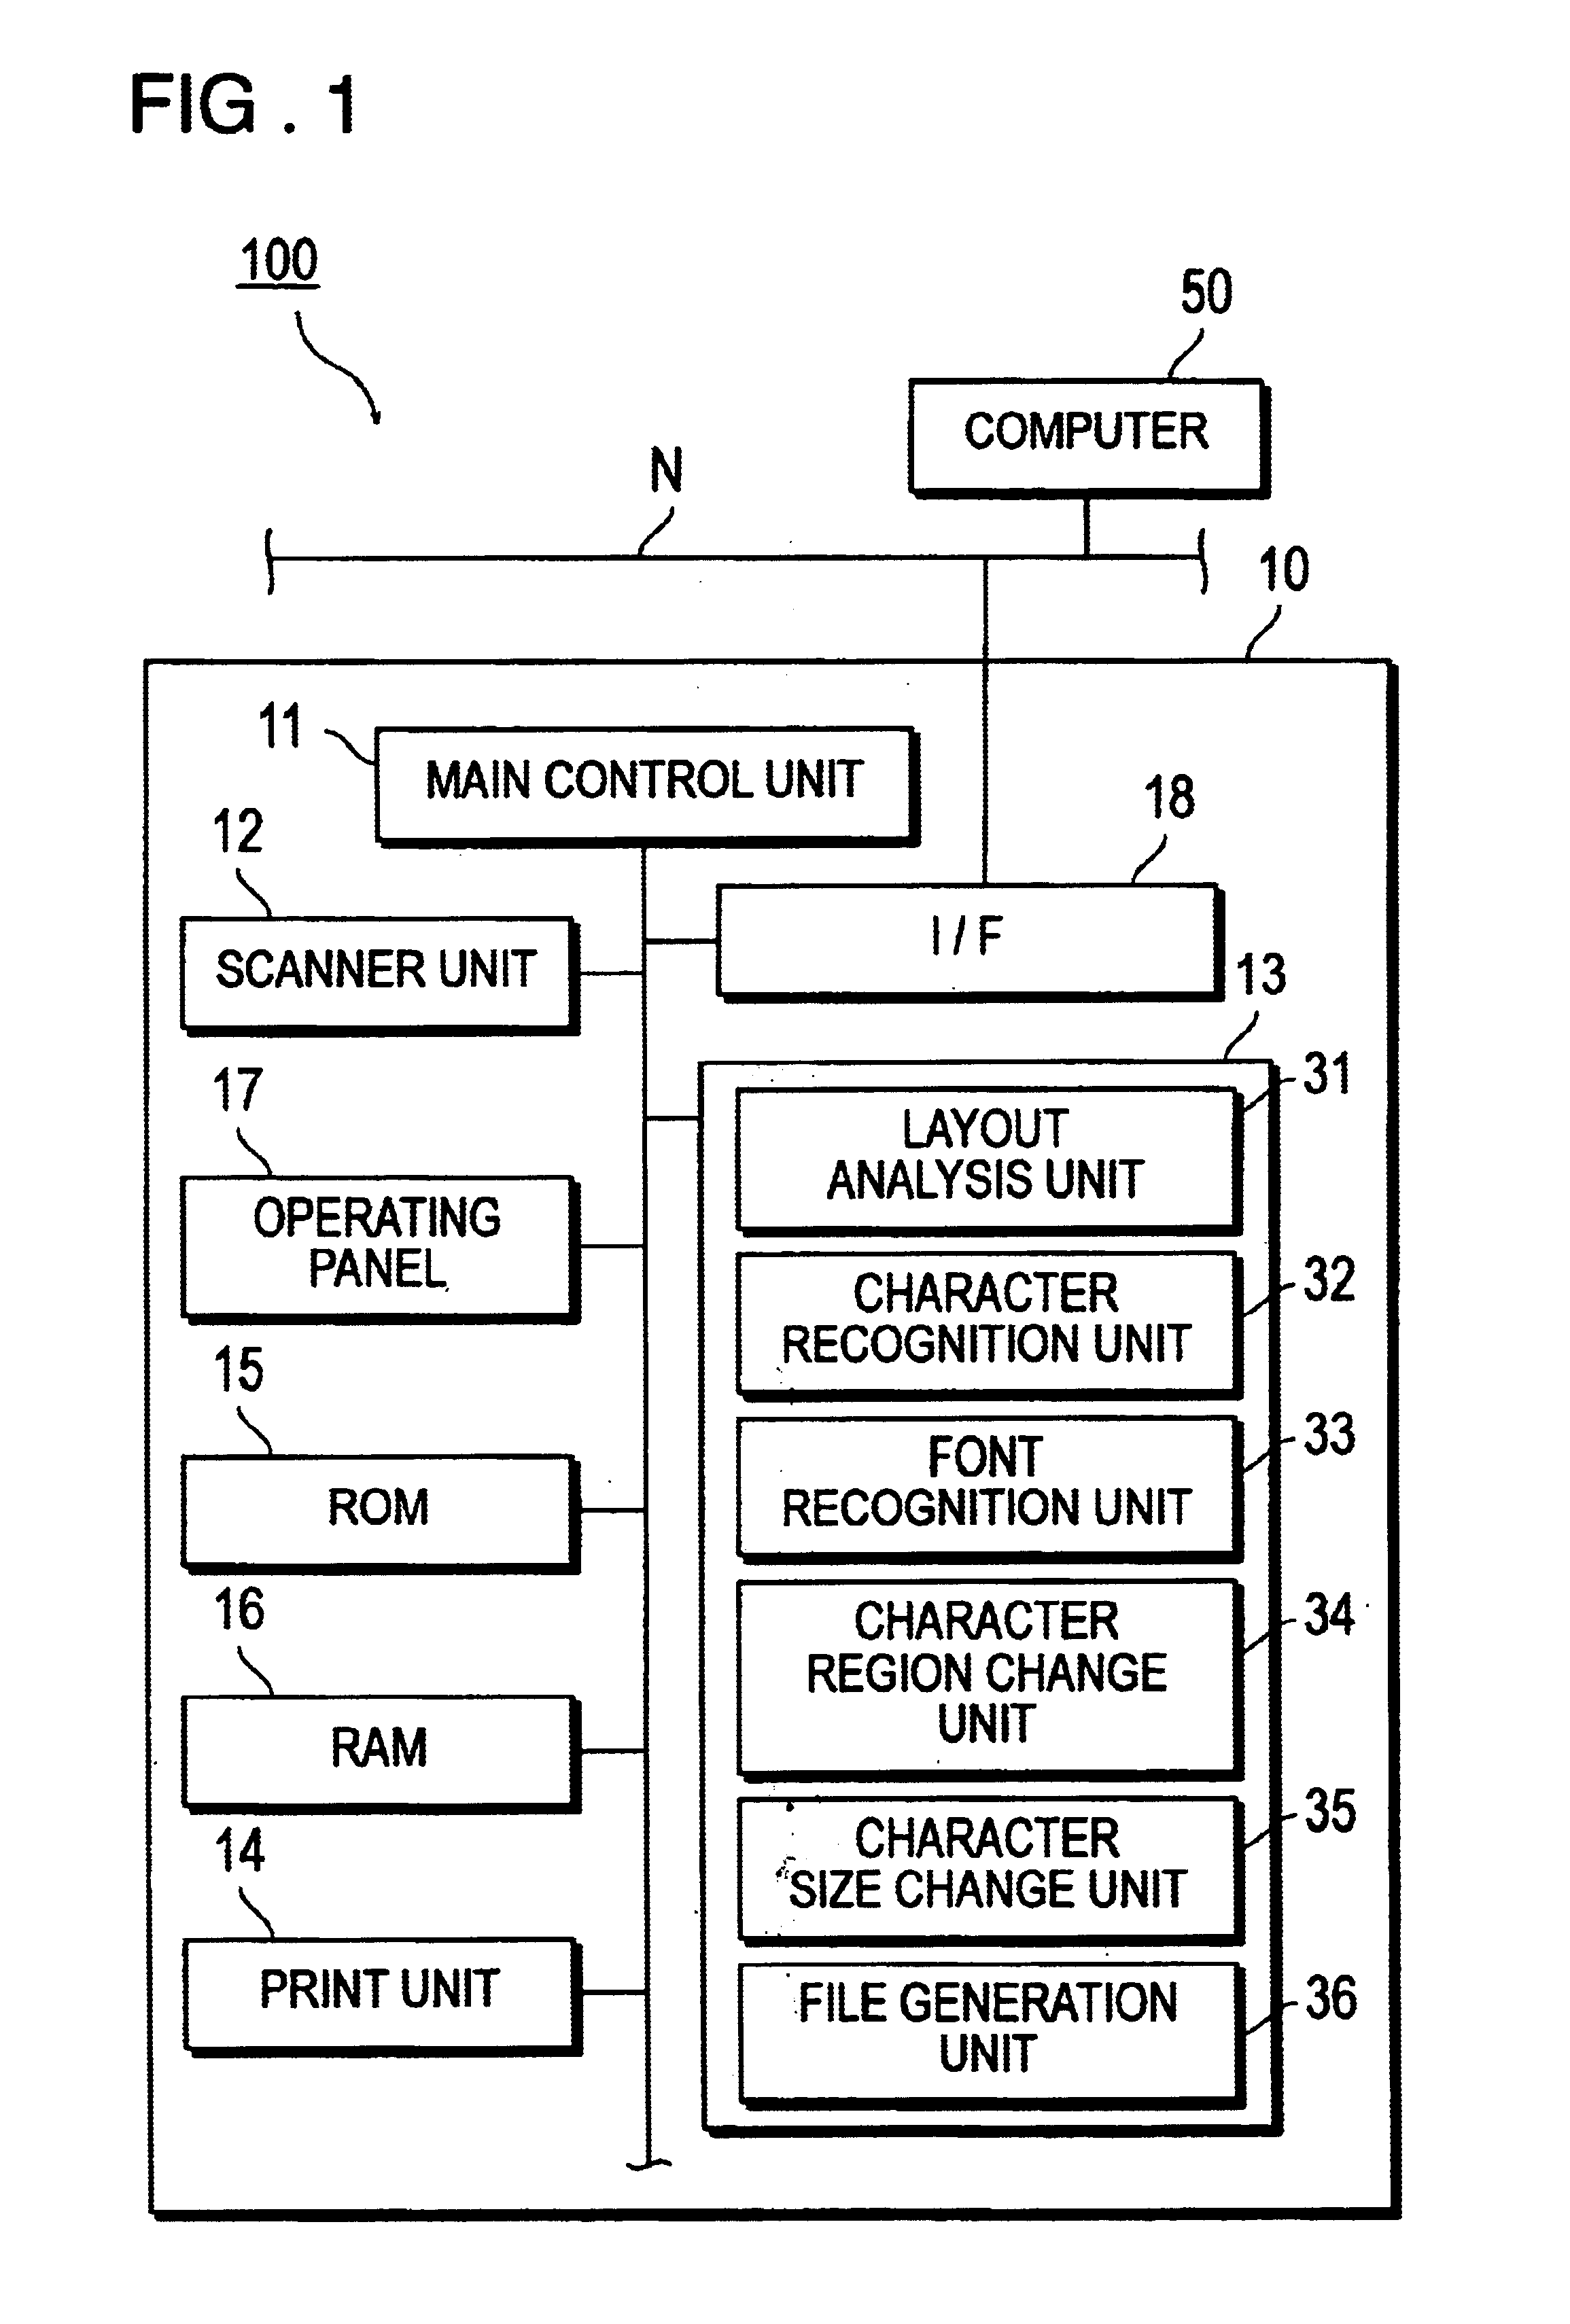 Image recognition apparatus, method and program product